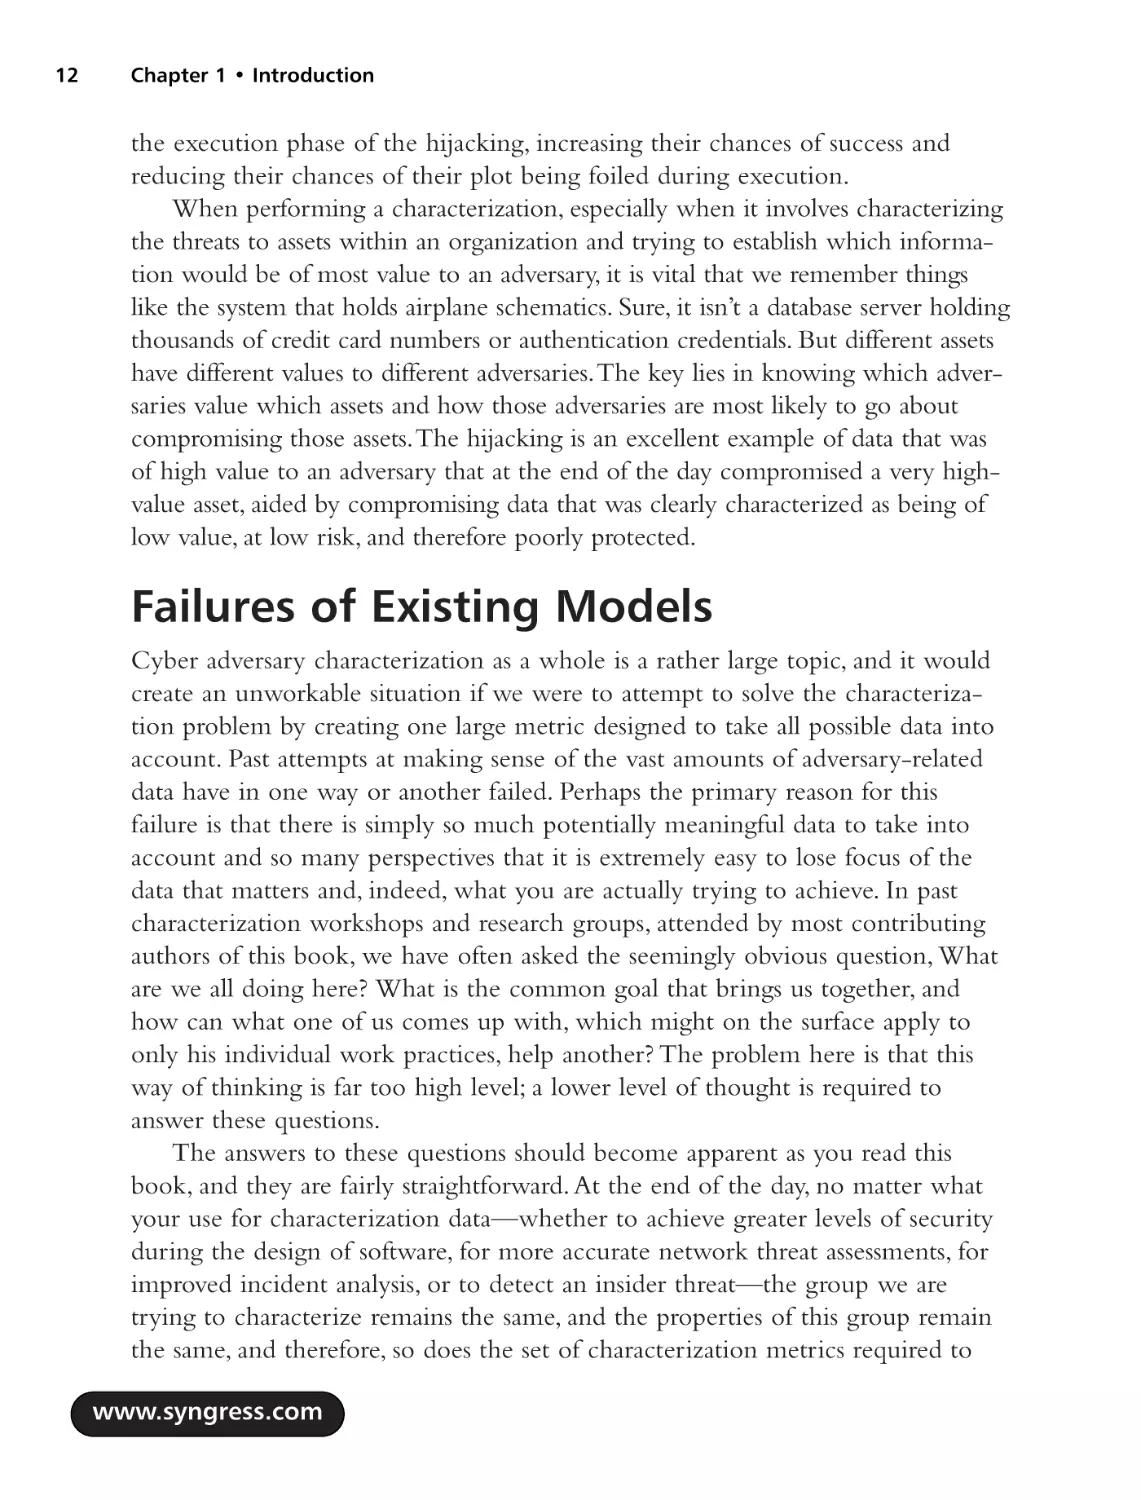 Failures of Existing Models